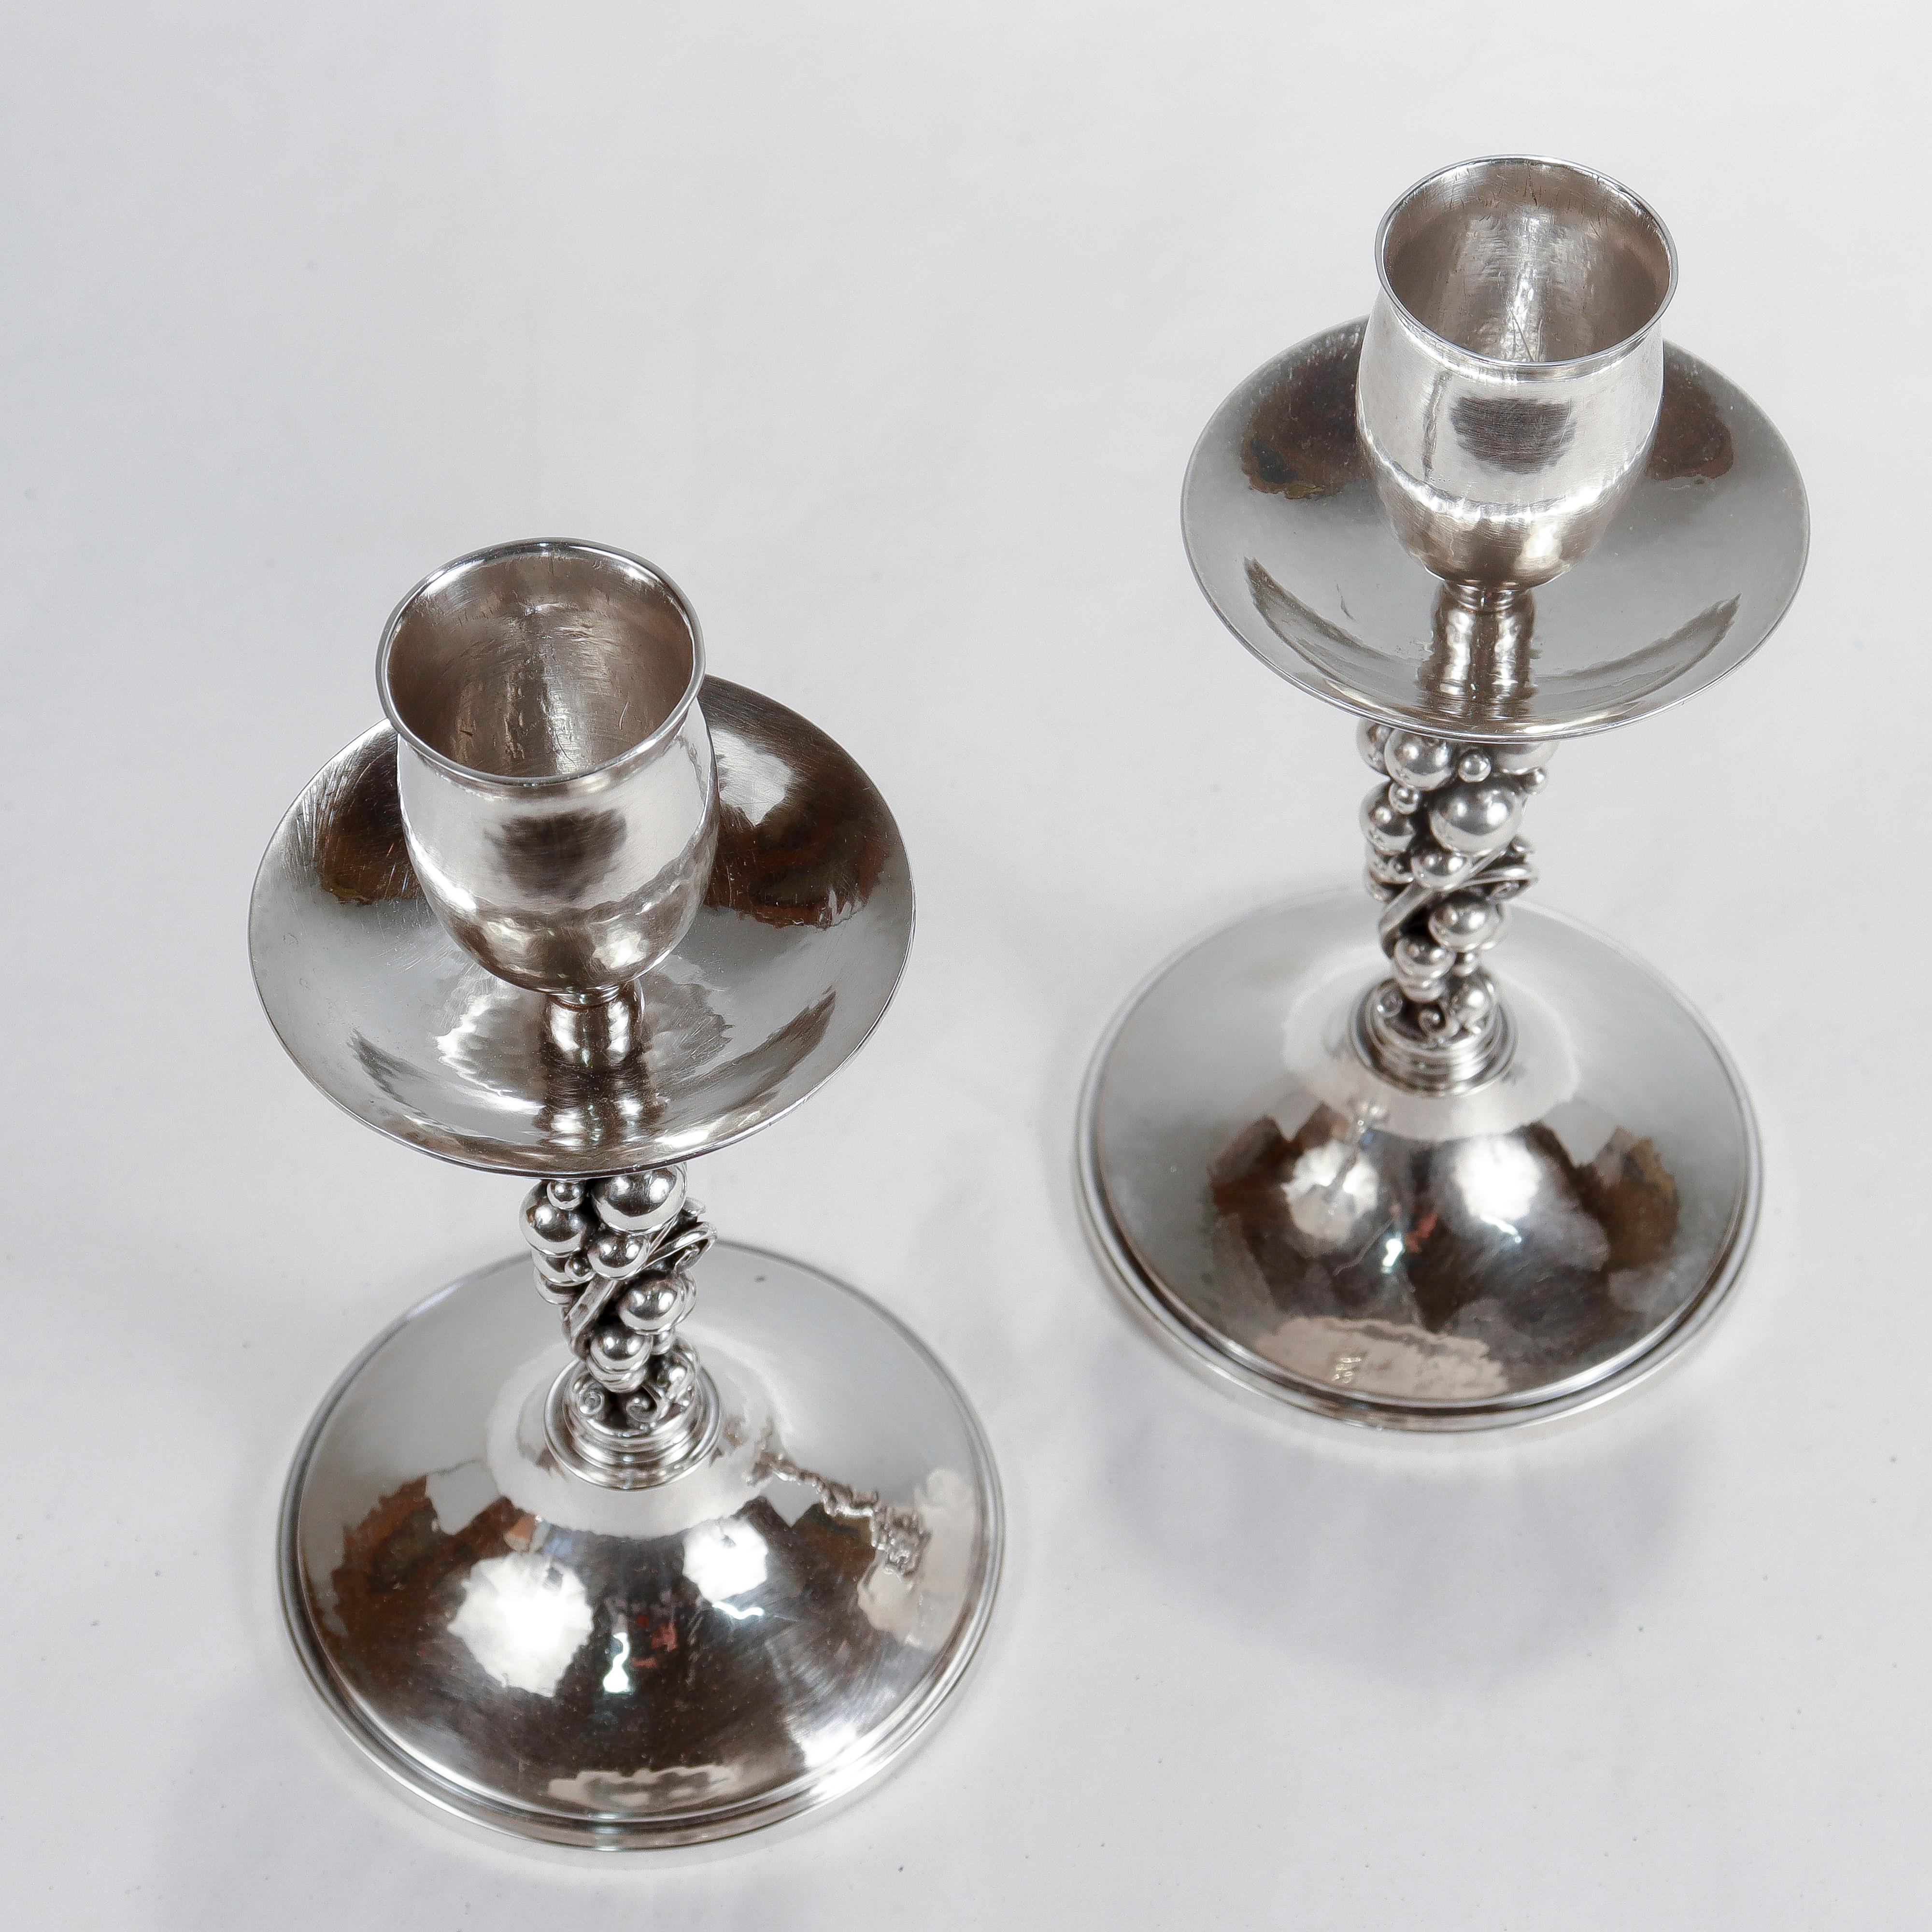 Pair of Signed Danish Modern Sterling Silver Grapes Candlesticks by Aage Weimar For Sale 6